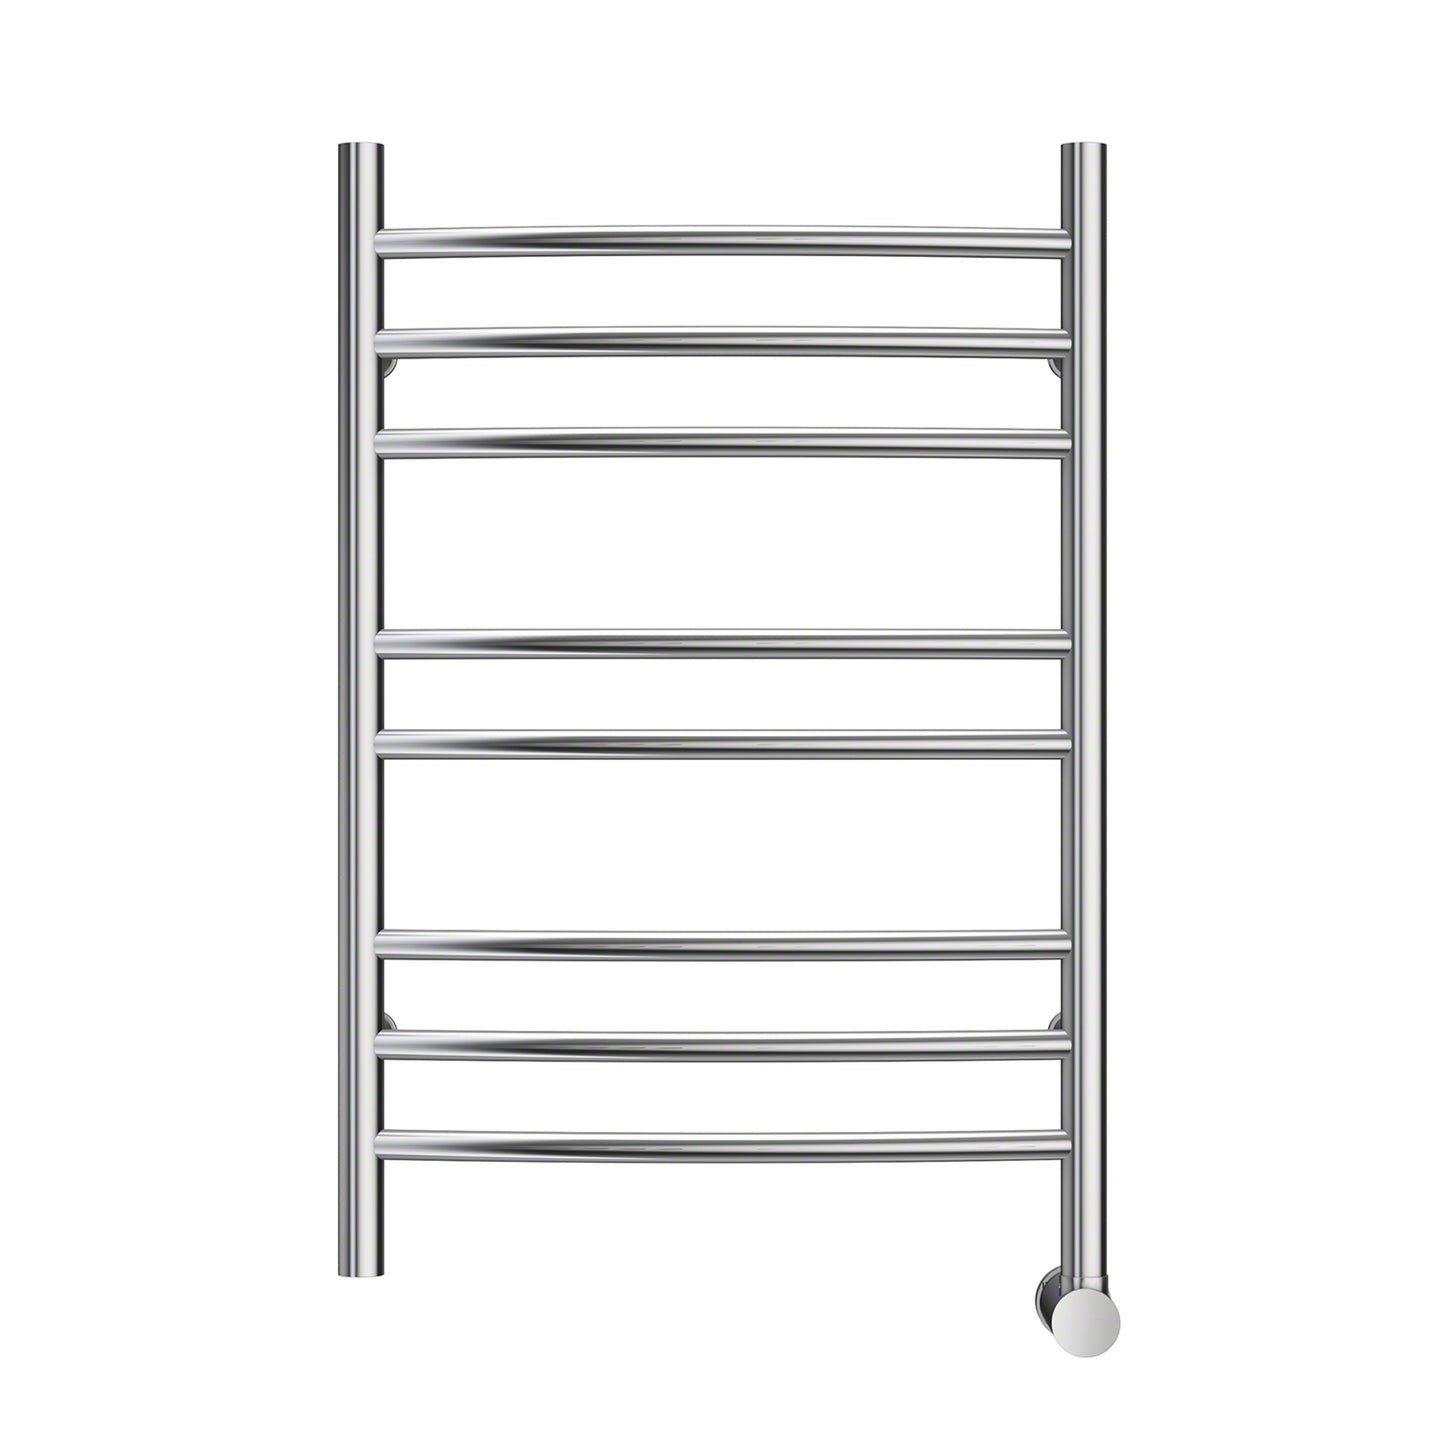 W328 8-Bar Wall Mounted Electric Towel Warmer with Digital Timer in Stainless Steel Polished